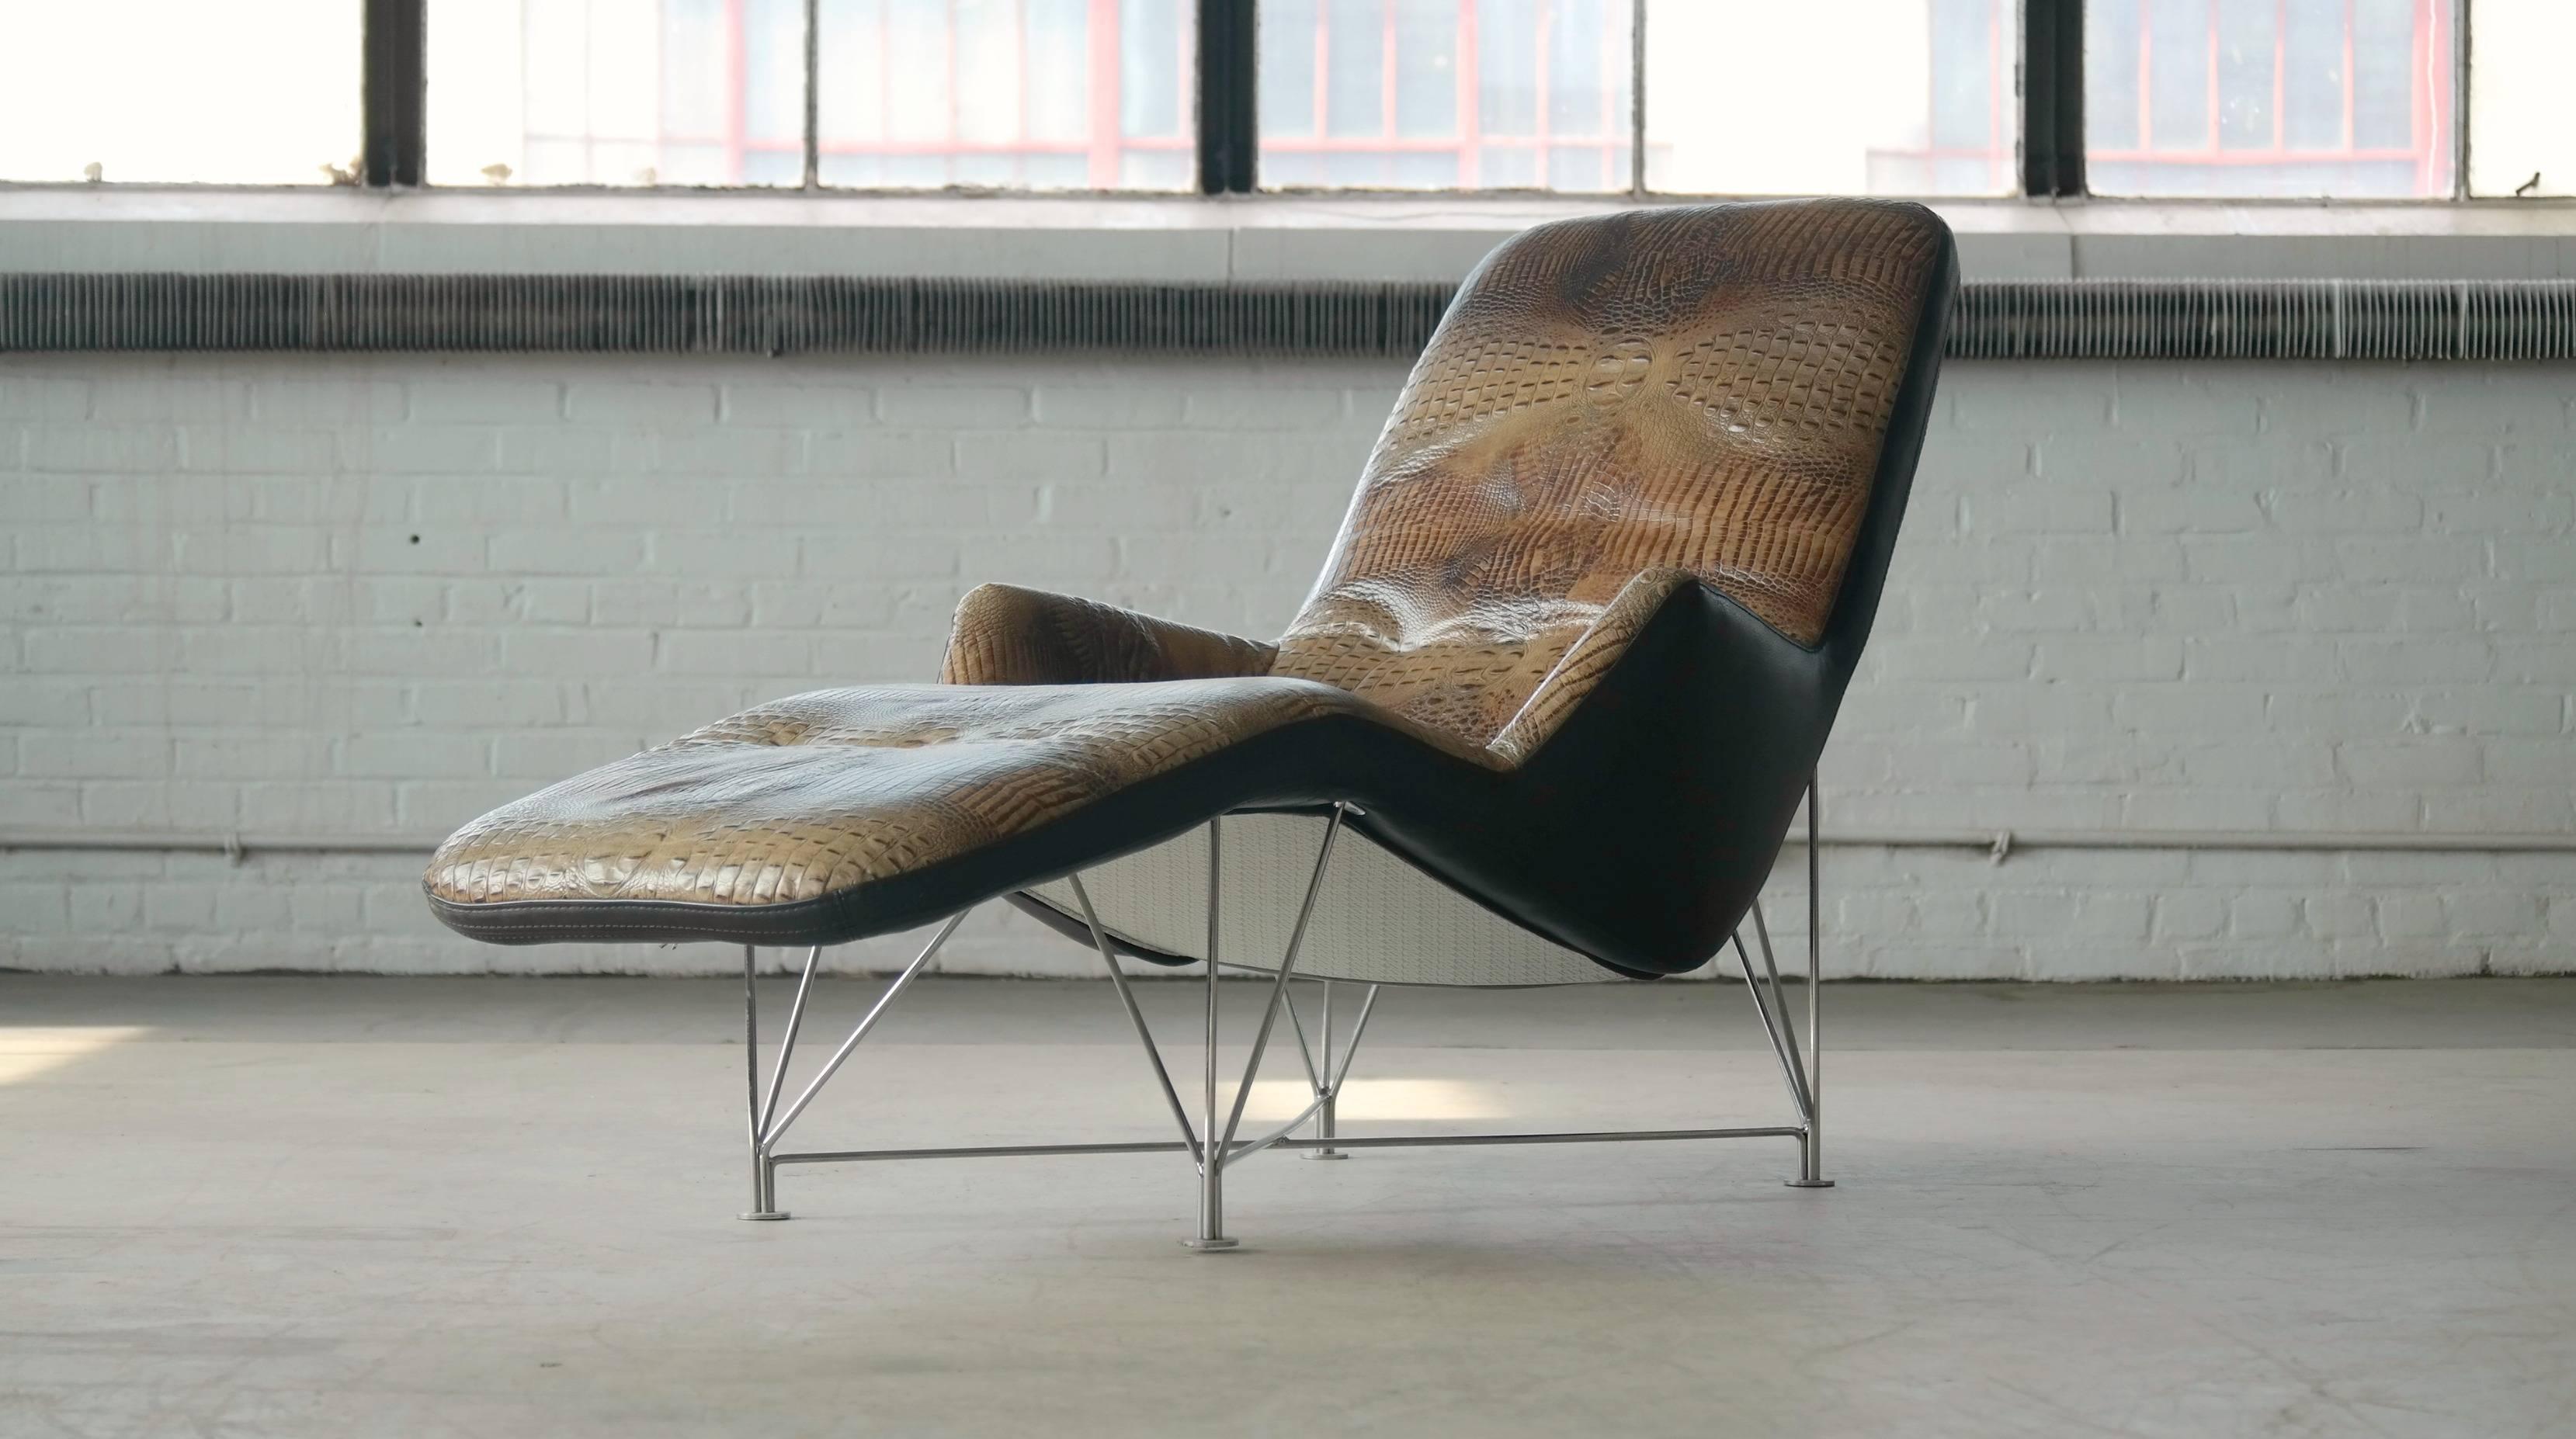 Kenneth Bergenblad model Superspider chaise longue in faux crocodile leather designed in the 1980s for Dux, Sweden, 1980s. The Superspider has become an instant classic and very sought after. Exceedingly rare in the supple beautiful faux crocodile